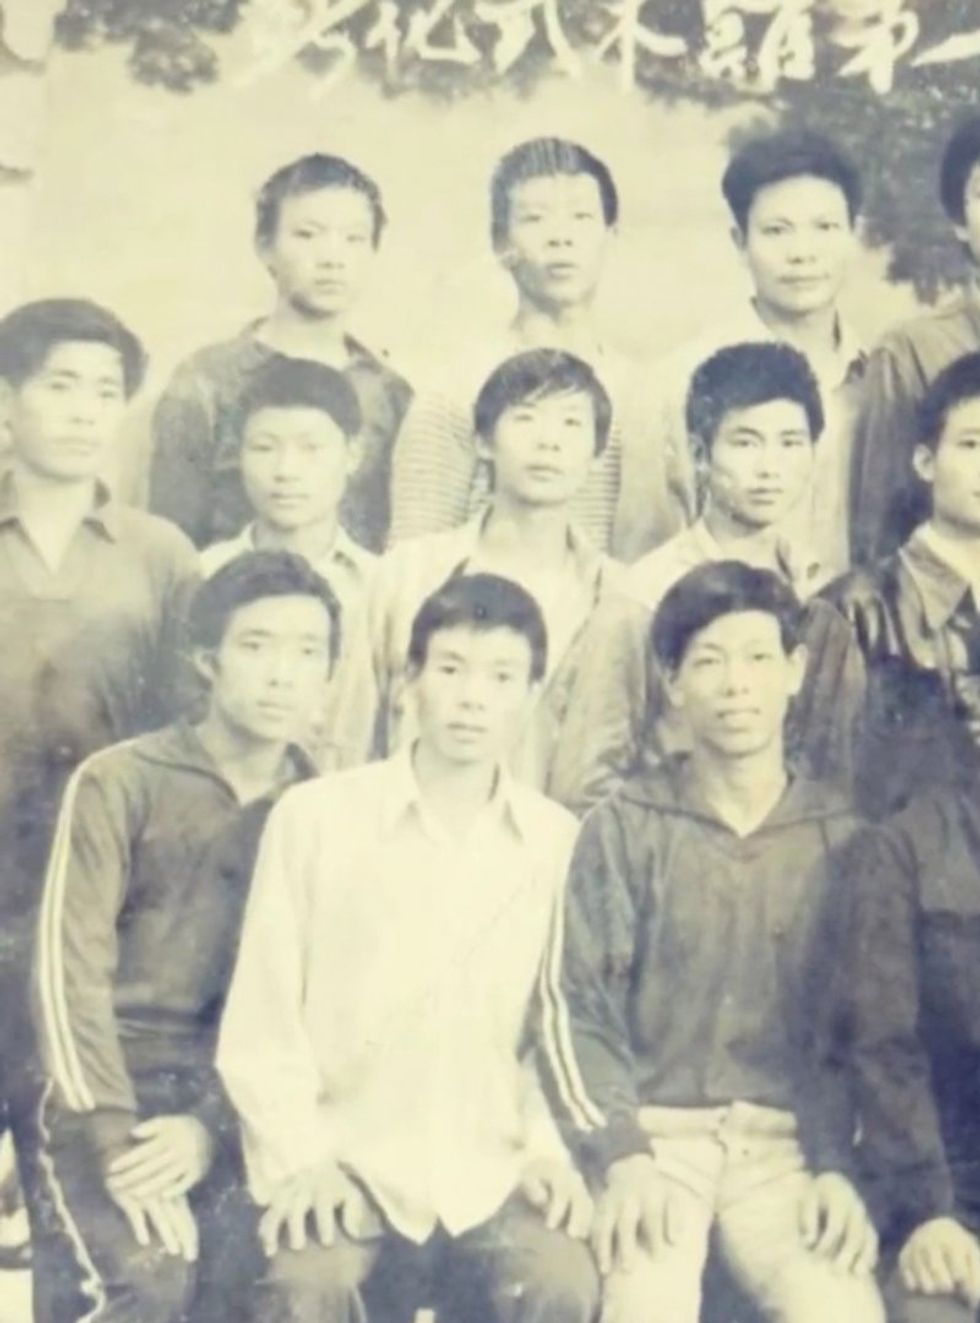 Class photo of Chinese teenage wushu apprentices taken in 1983.